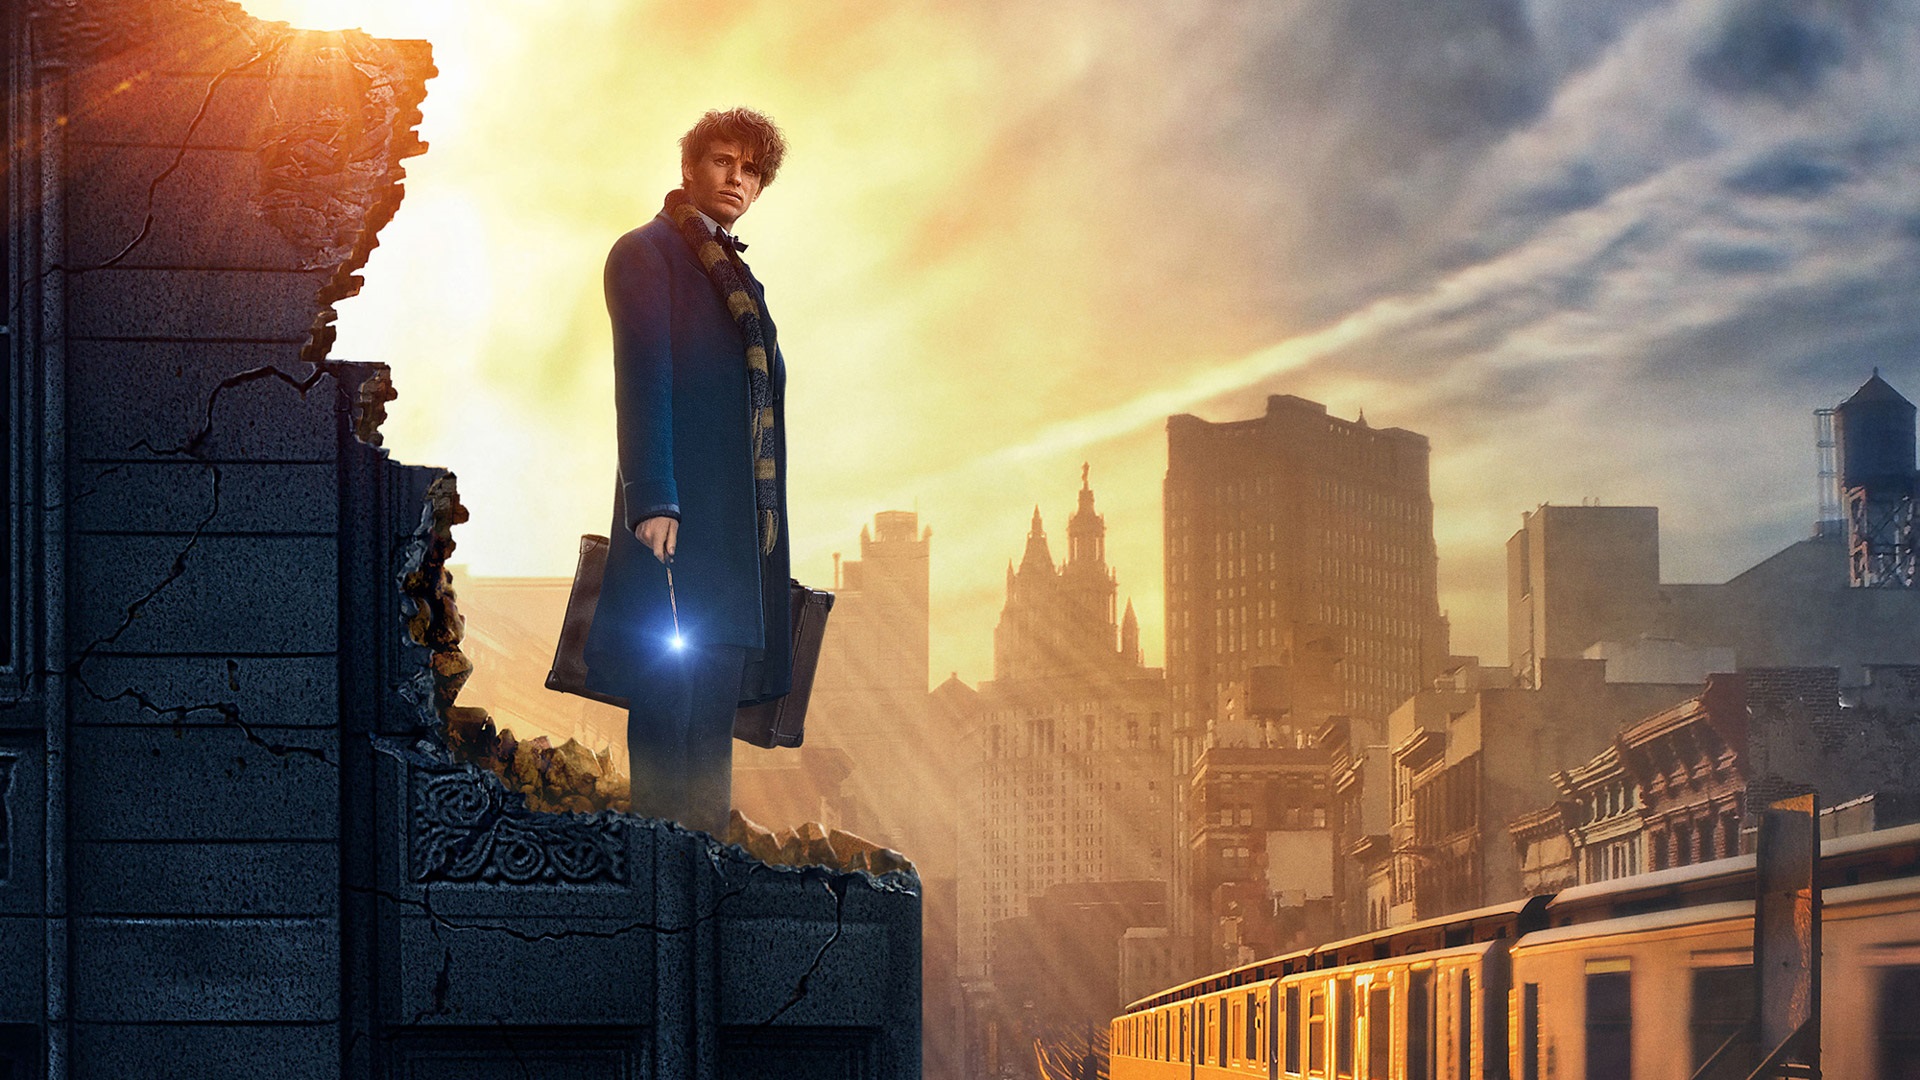 download the new for windows Fantastic Beasts and Where to Find Them